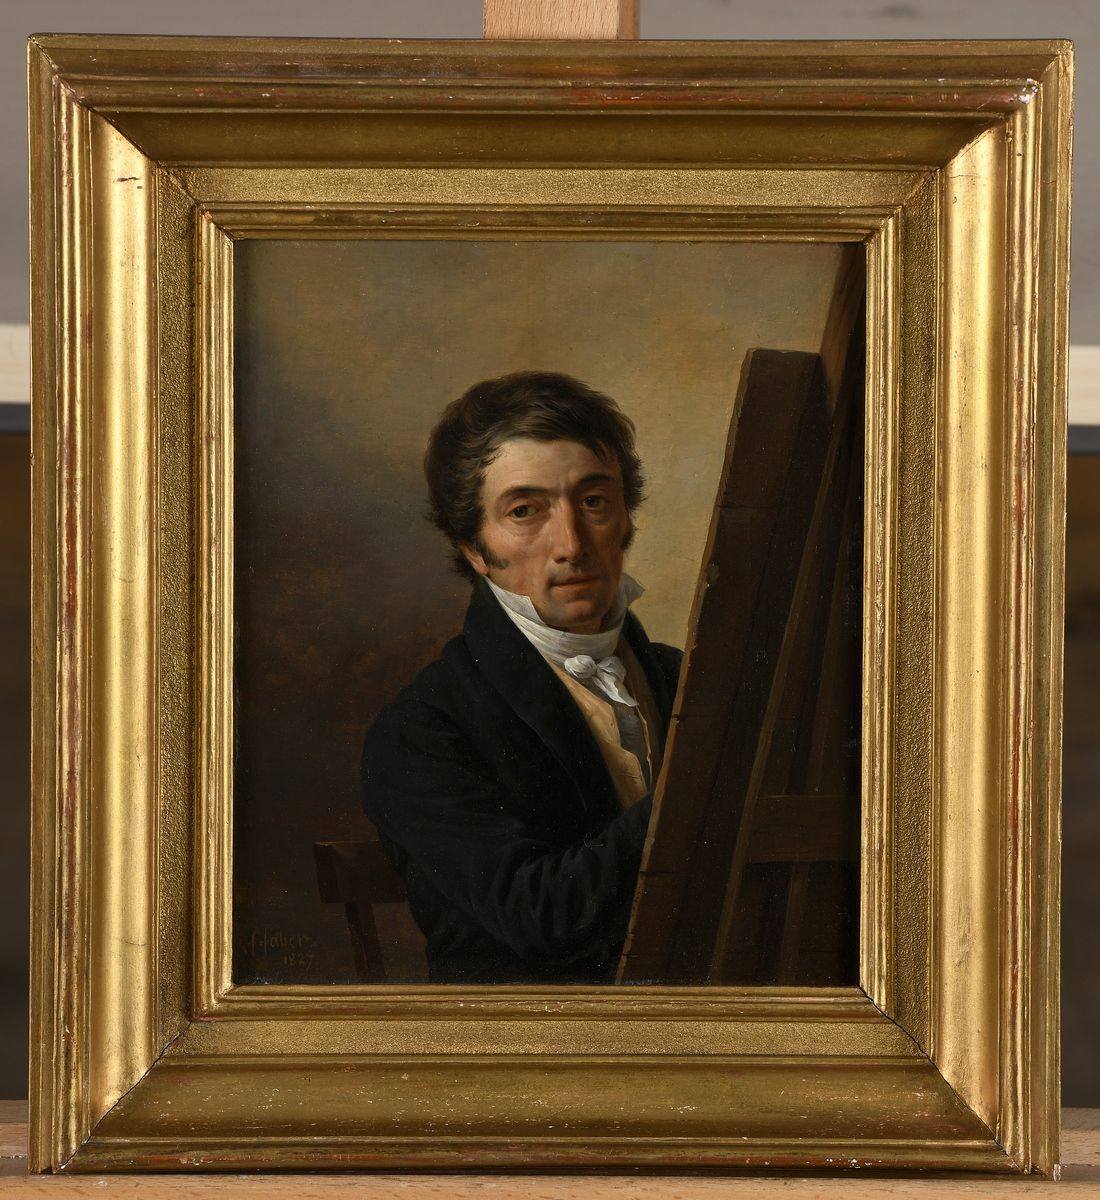 Null FABER Friedrich Theodor
Brussels 1782 - id. ; 1844

Self-portrait at the ea&hellip;